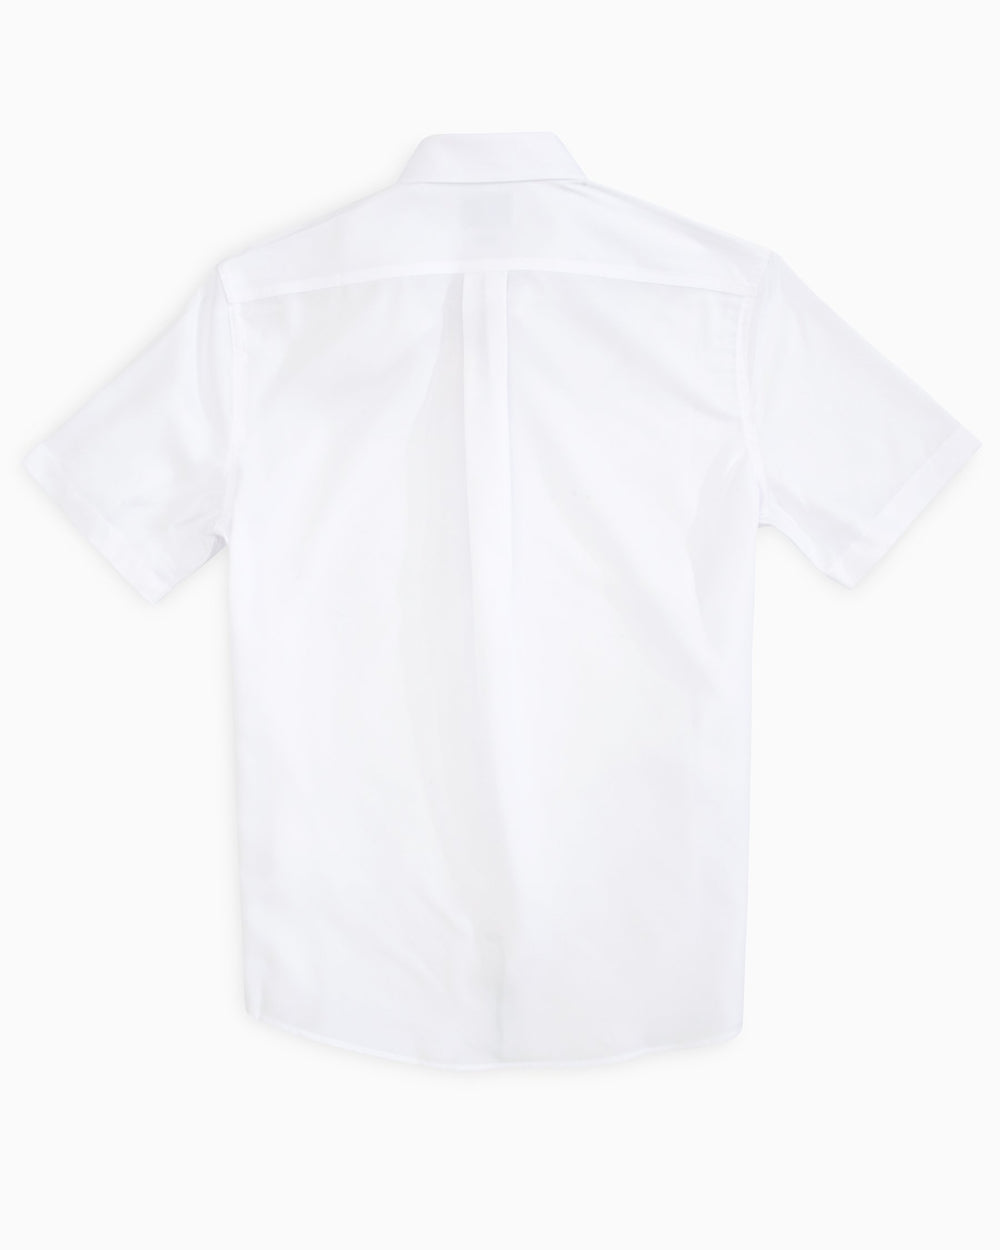 The back view of the Men's White Clemson Tigers Short Sleeve Button Down Dock Shirt by Southern Tide - Classic White